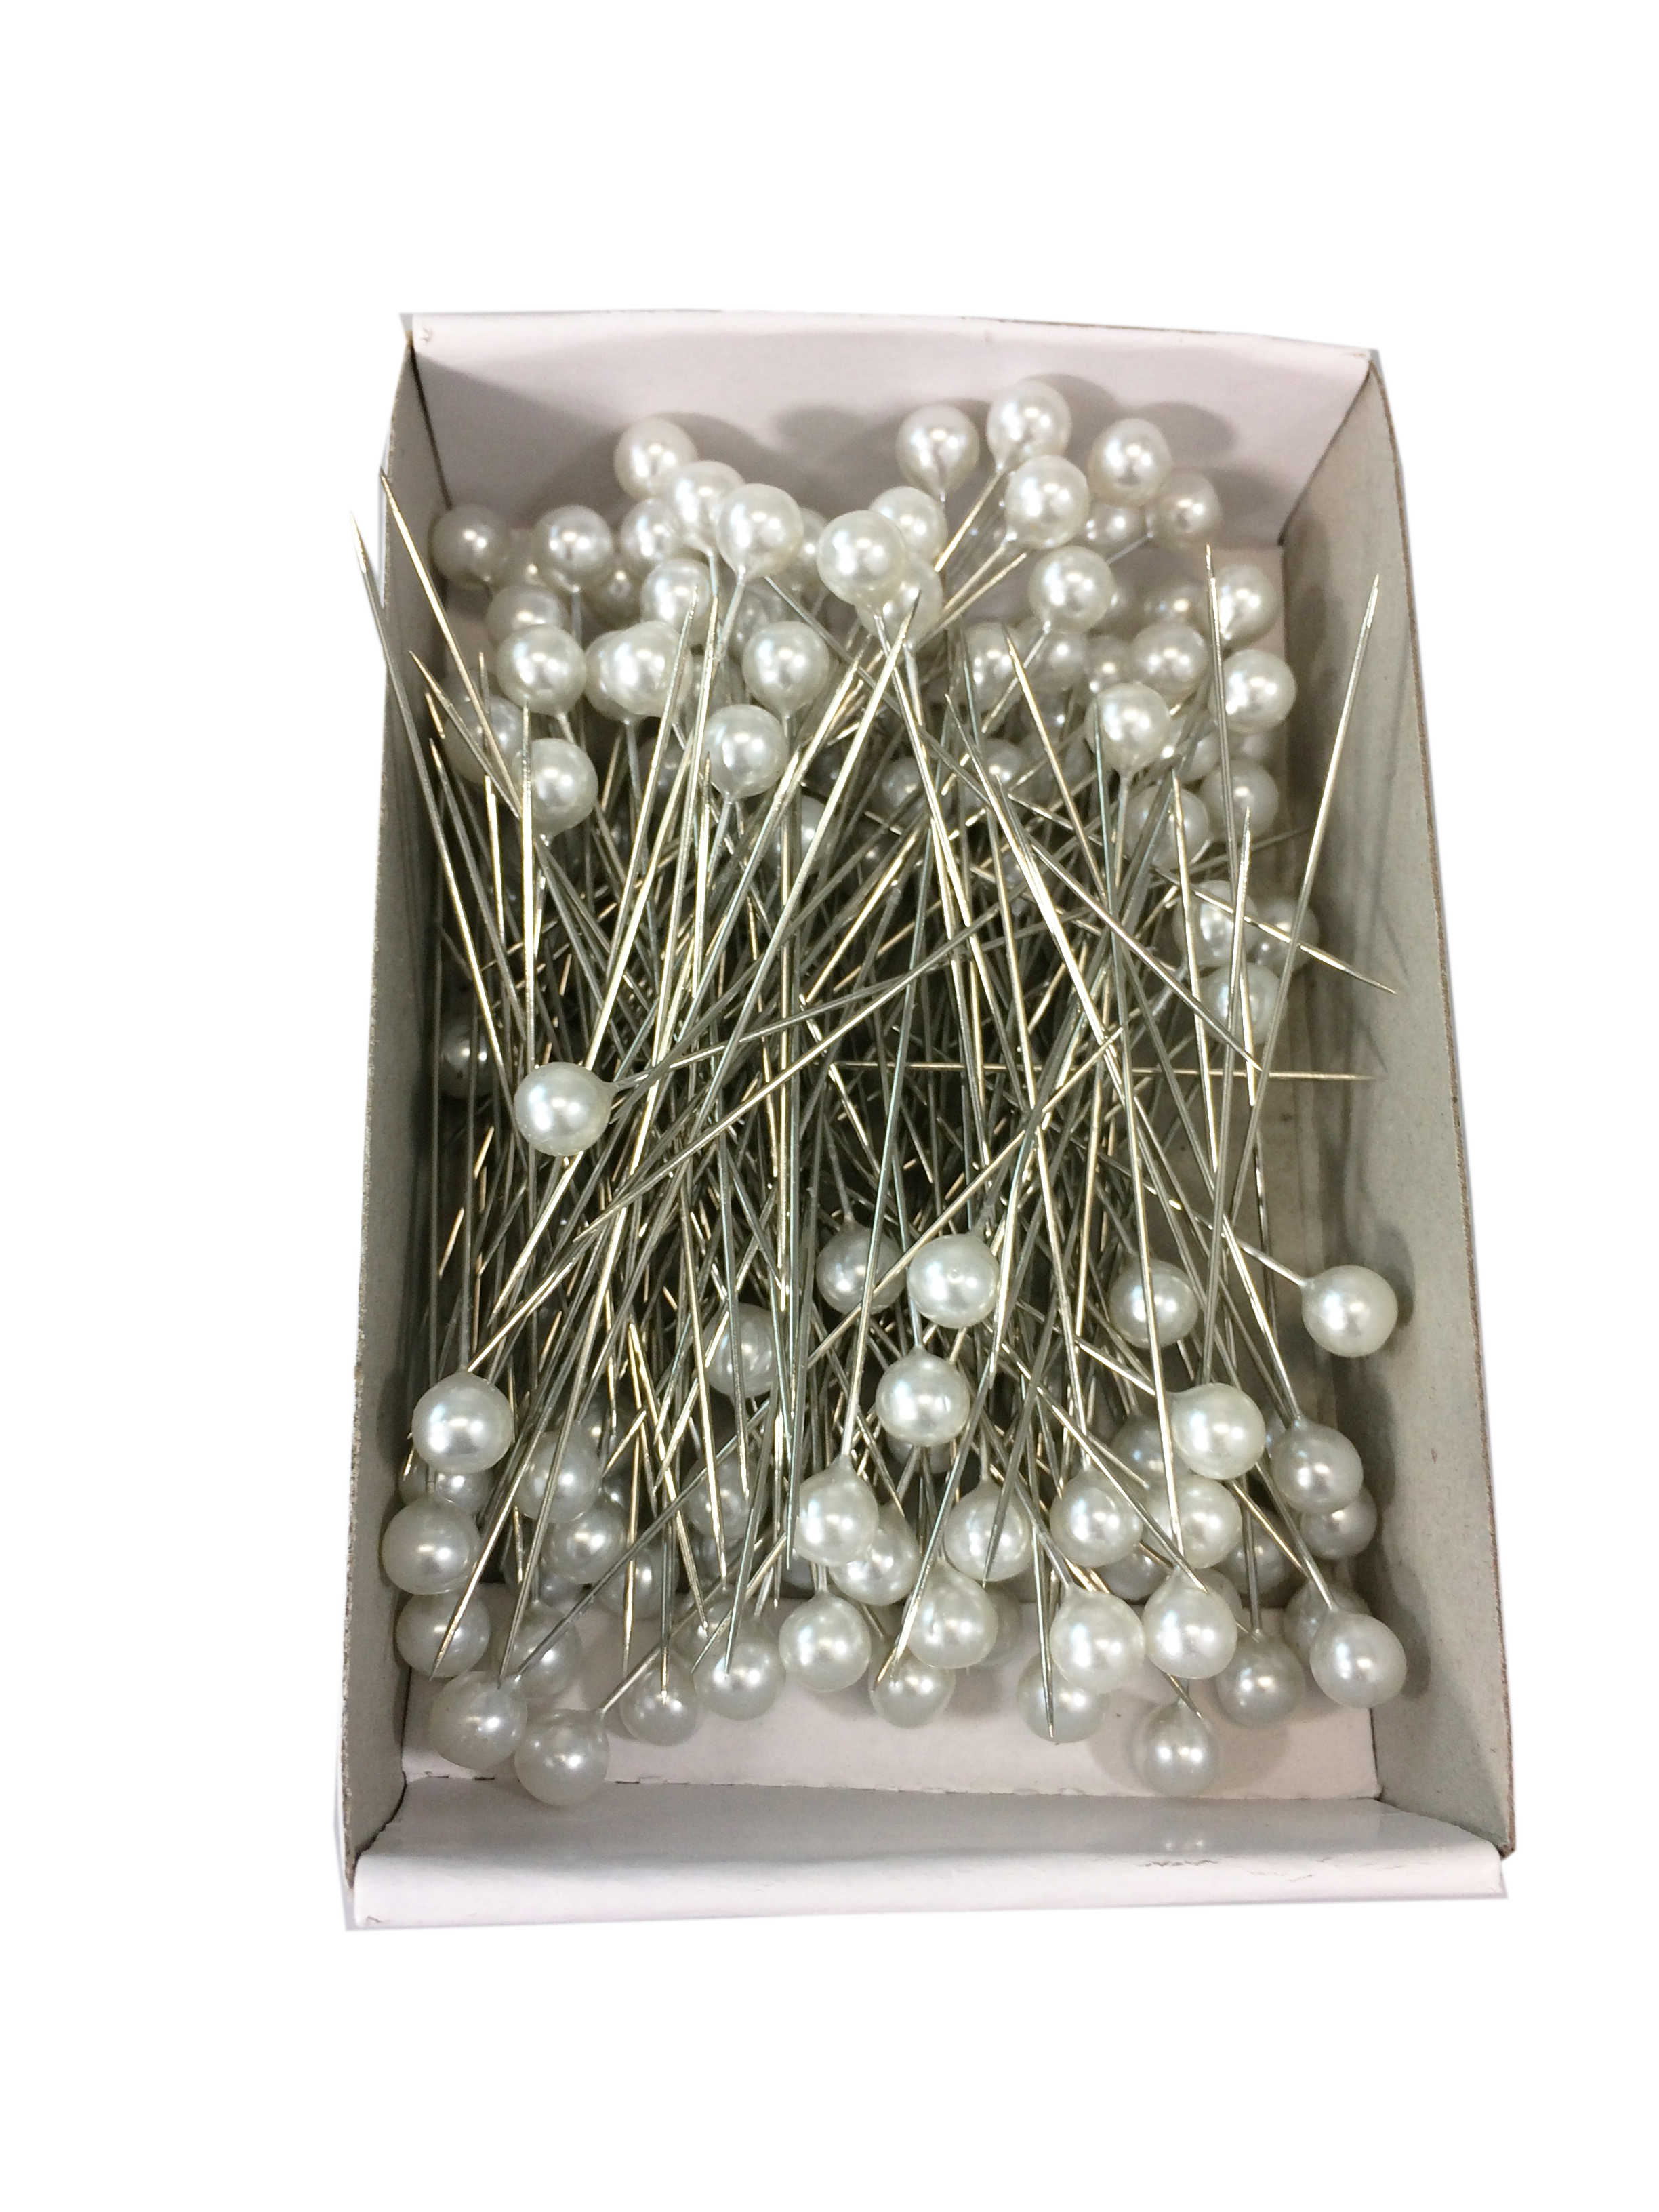 144 pieces of 2.5 Inch Long Pins with White Plastic Pearl Head for  Weddings, Corsages, Floral Designs, and more events